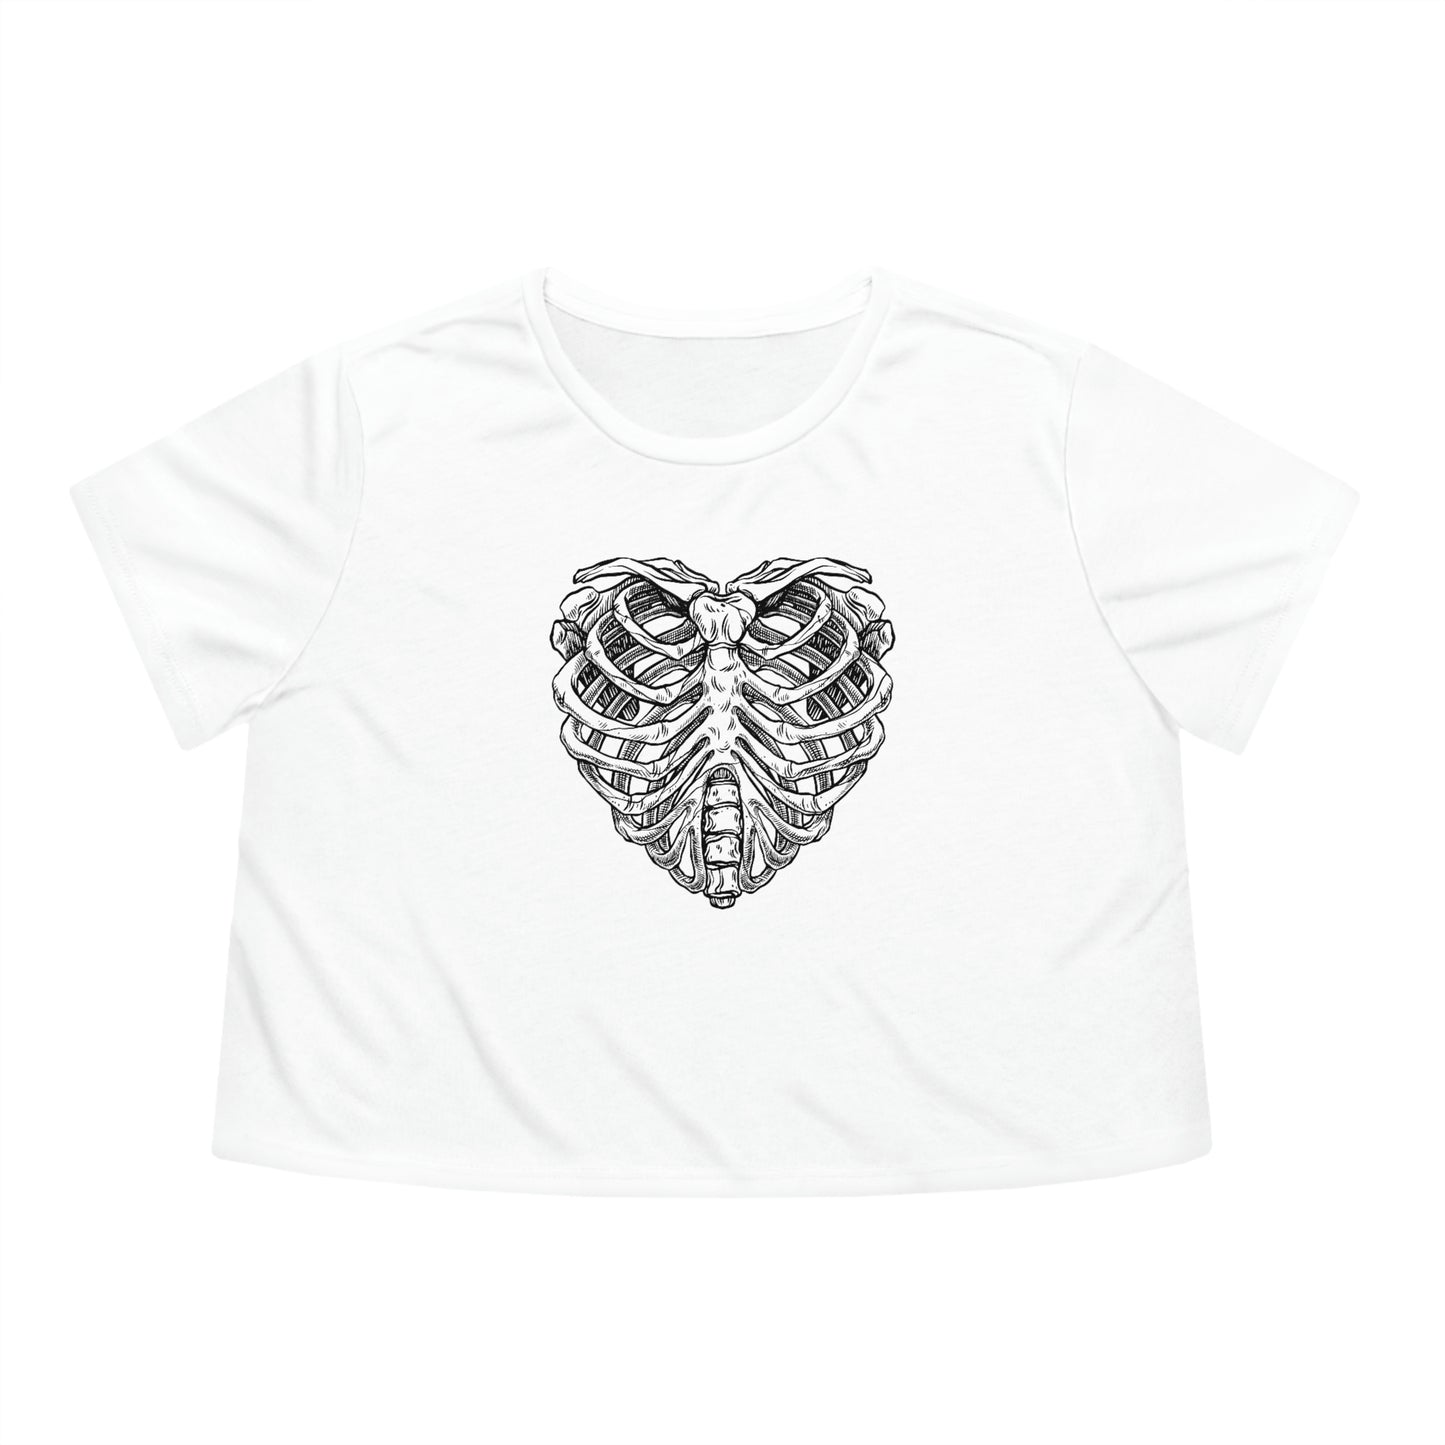 Skeleton Heart Crop Top Tshirt, Tee Women Adult Cute Aesthetic Graphic Crewneck Sexy Festival Y2K Cropped Shirt Starcove Fashion